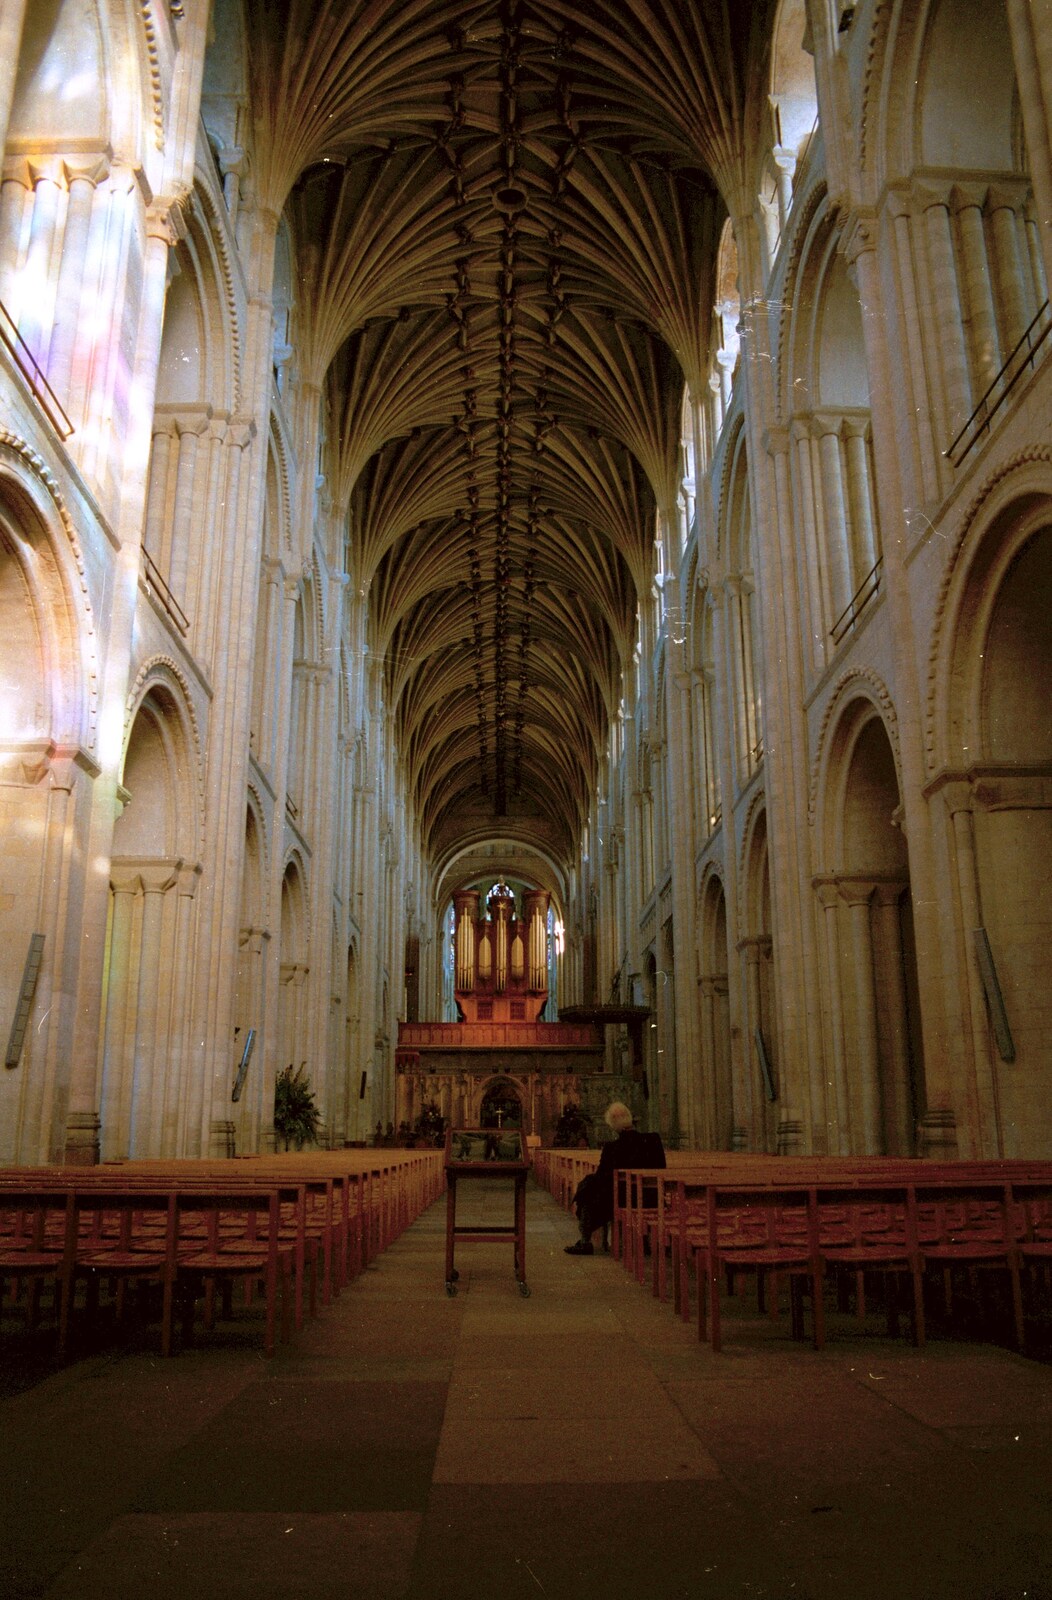 From Waterloo Station to Great Yarmouth, London and Norfolk - 20th September 1987: The nave of Norwich Cathedral